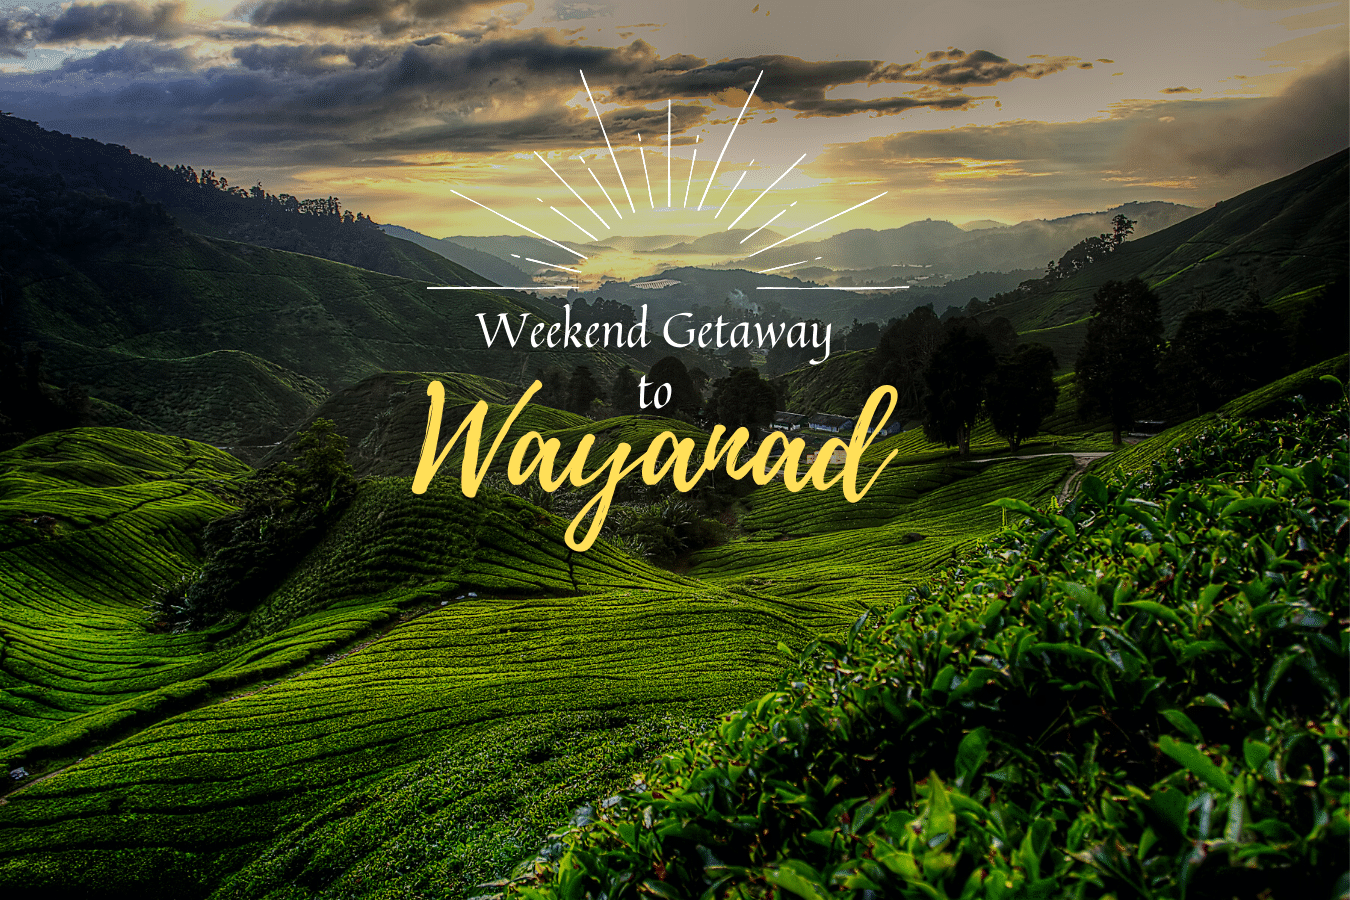 No better way to spend your weekend than at Wayanad